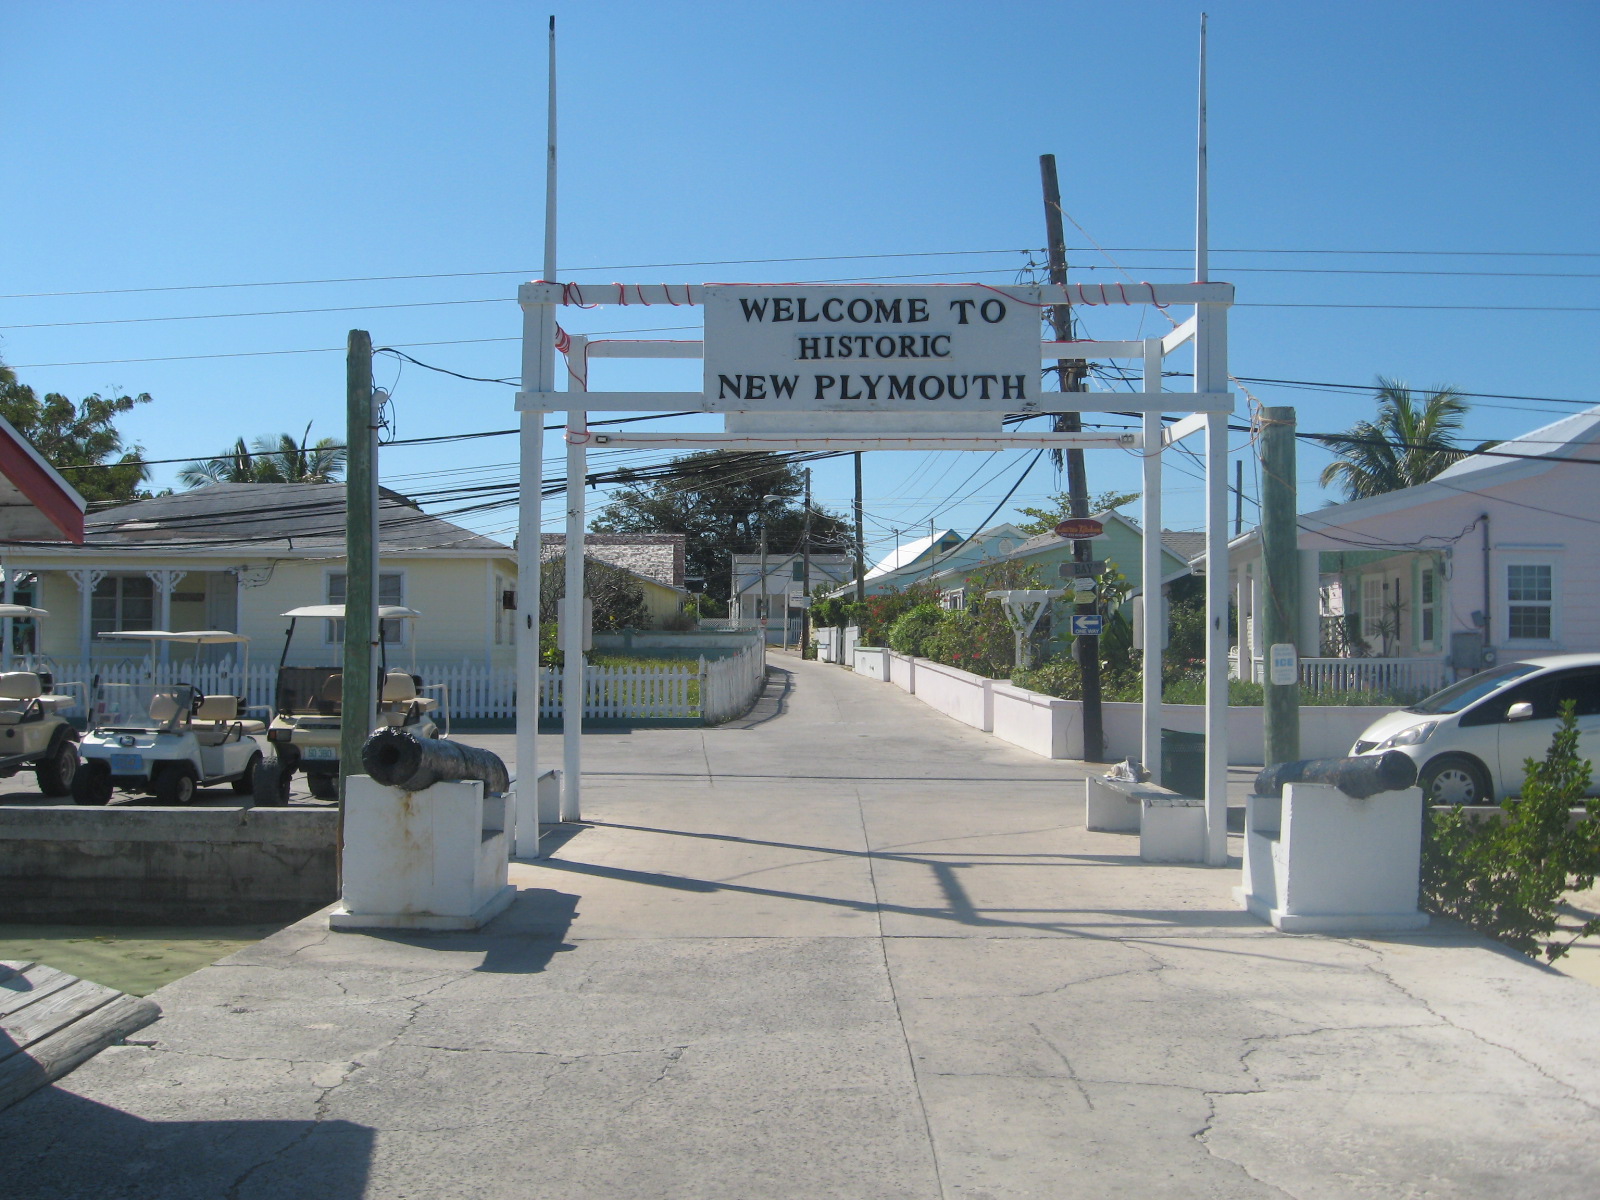 Another welcoming sign at the second dinghy dock. New Plymouth is the name of the settlement (village) on Green Turtle Cay,